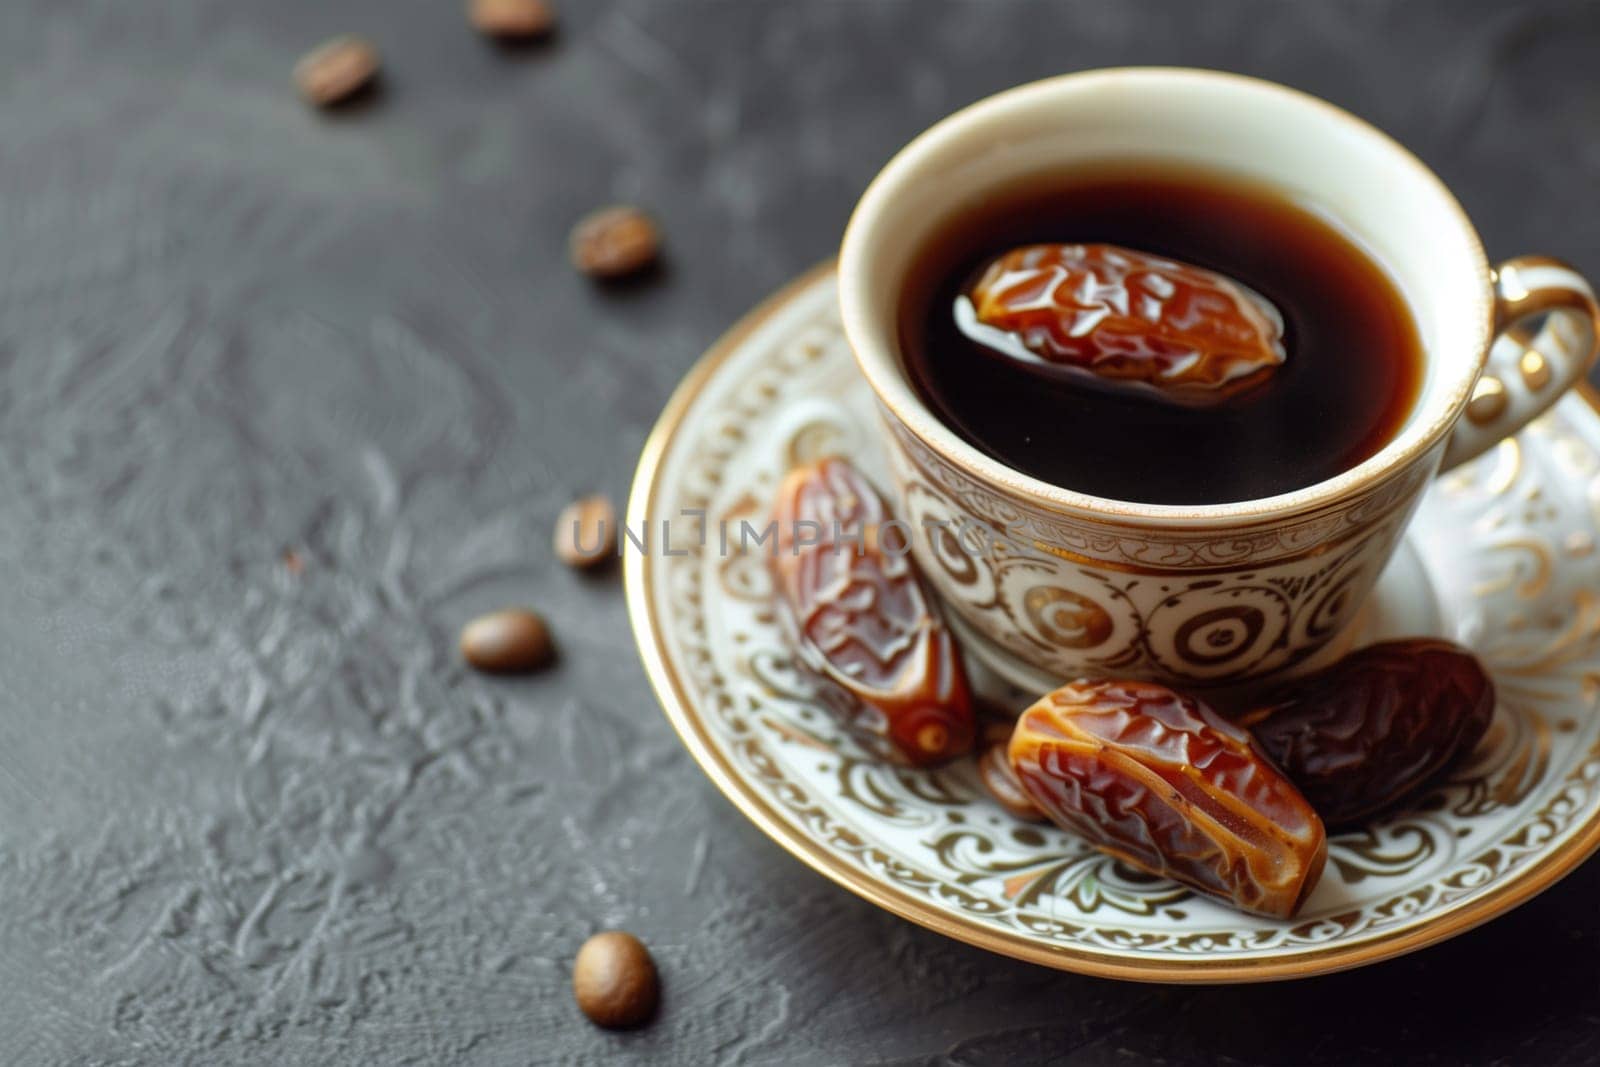 Traditional Arabic Coffee Served With Dates on an Ornate Saucer by Sd28DimoN_1976